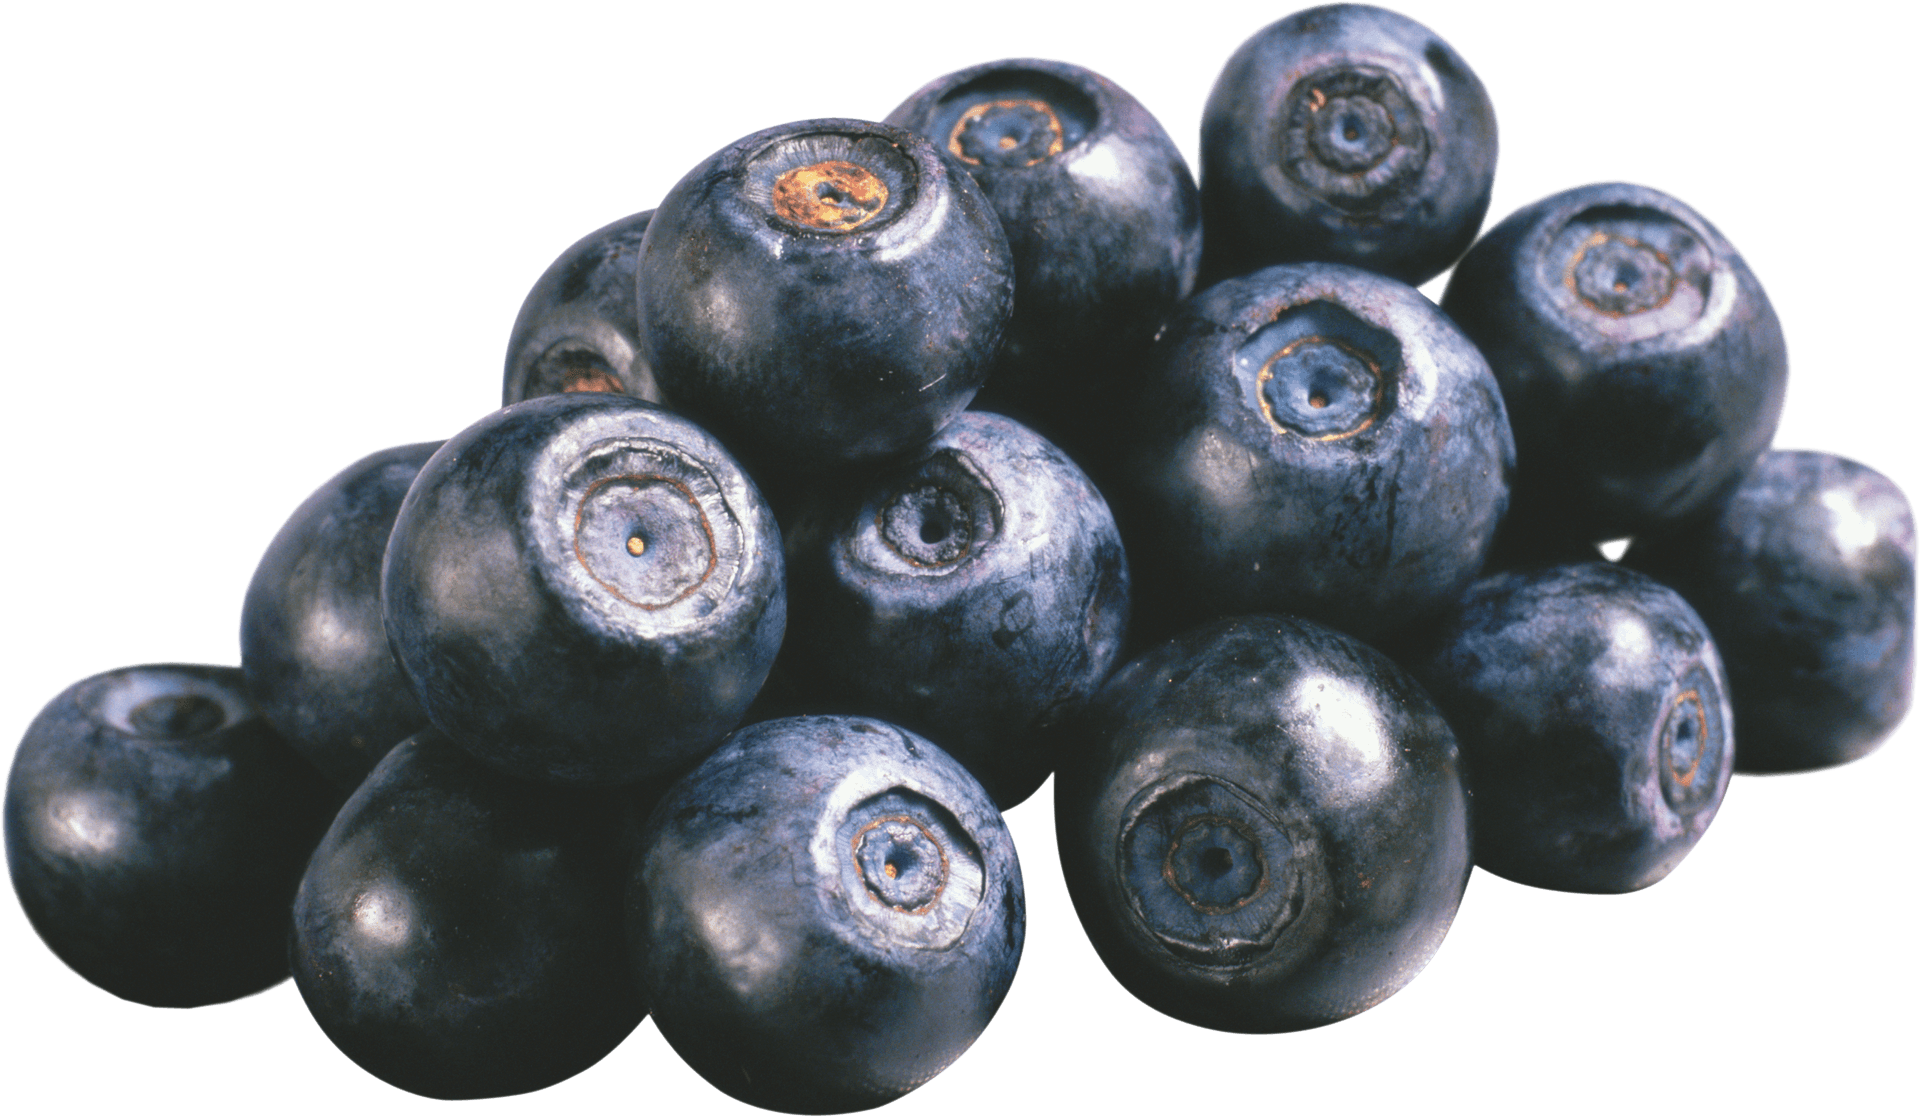 Fresh Blueberries Cluster.png PNG image